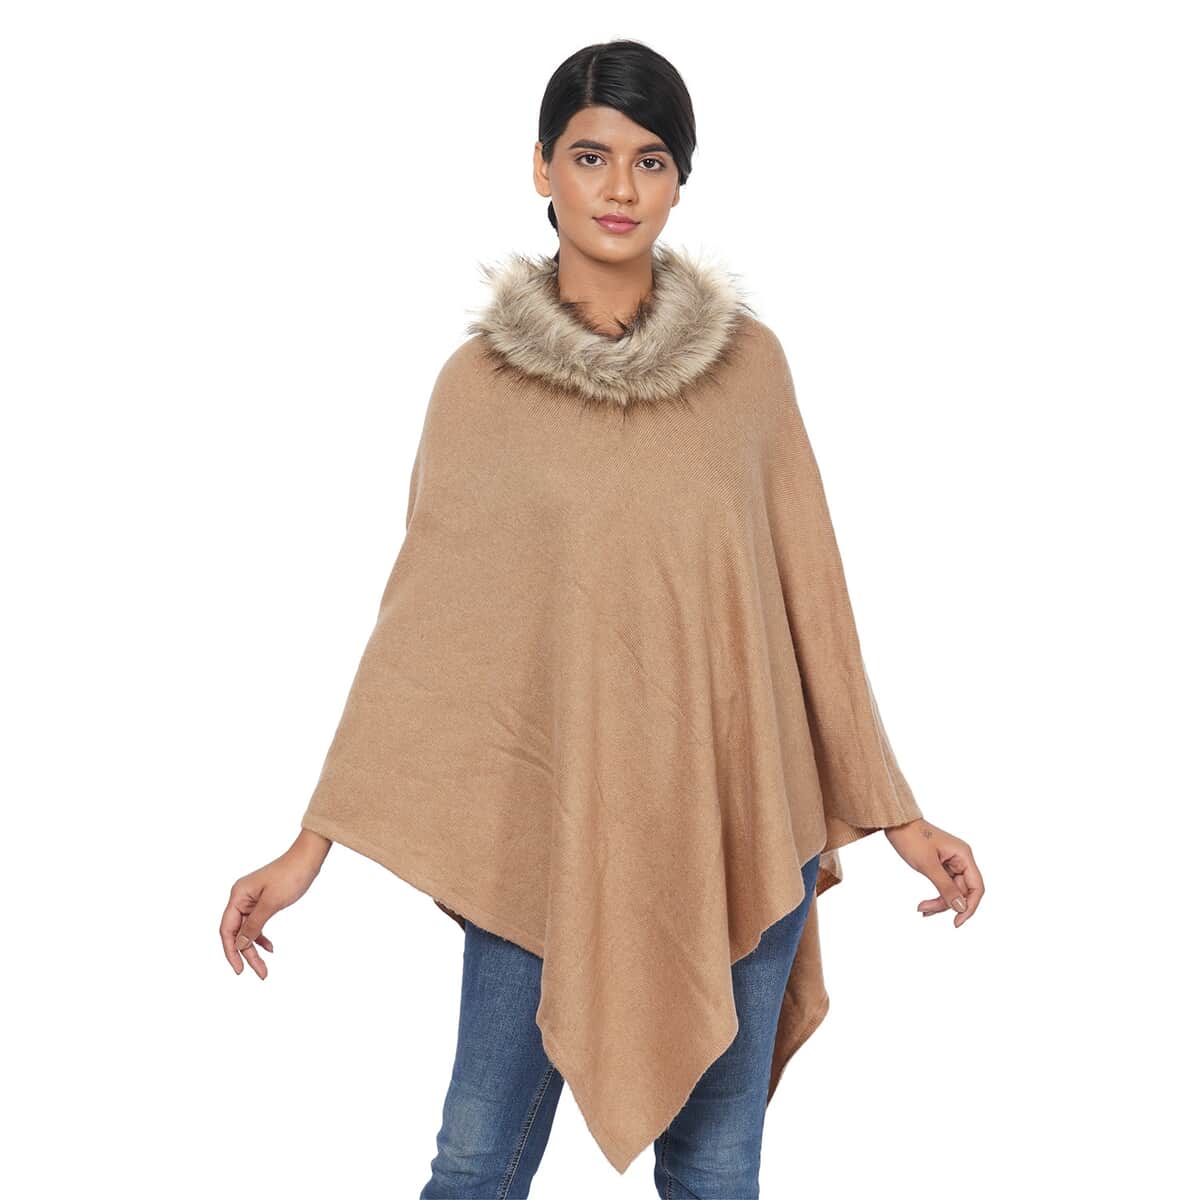 Beige 100% Cashmere Wool V-Shape Poncho with Faux Fur Collar (One Size Fits Most) image number 0